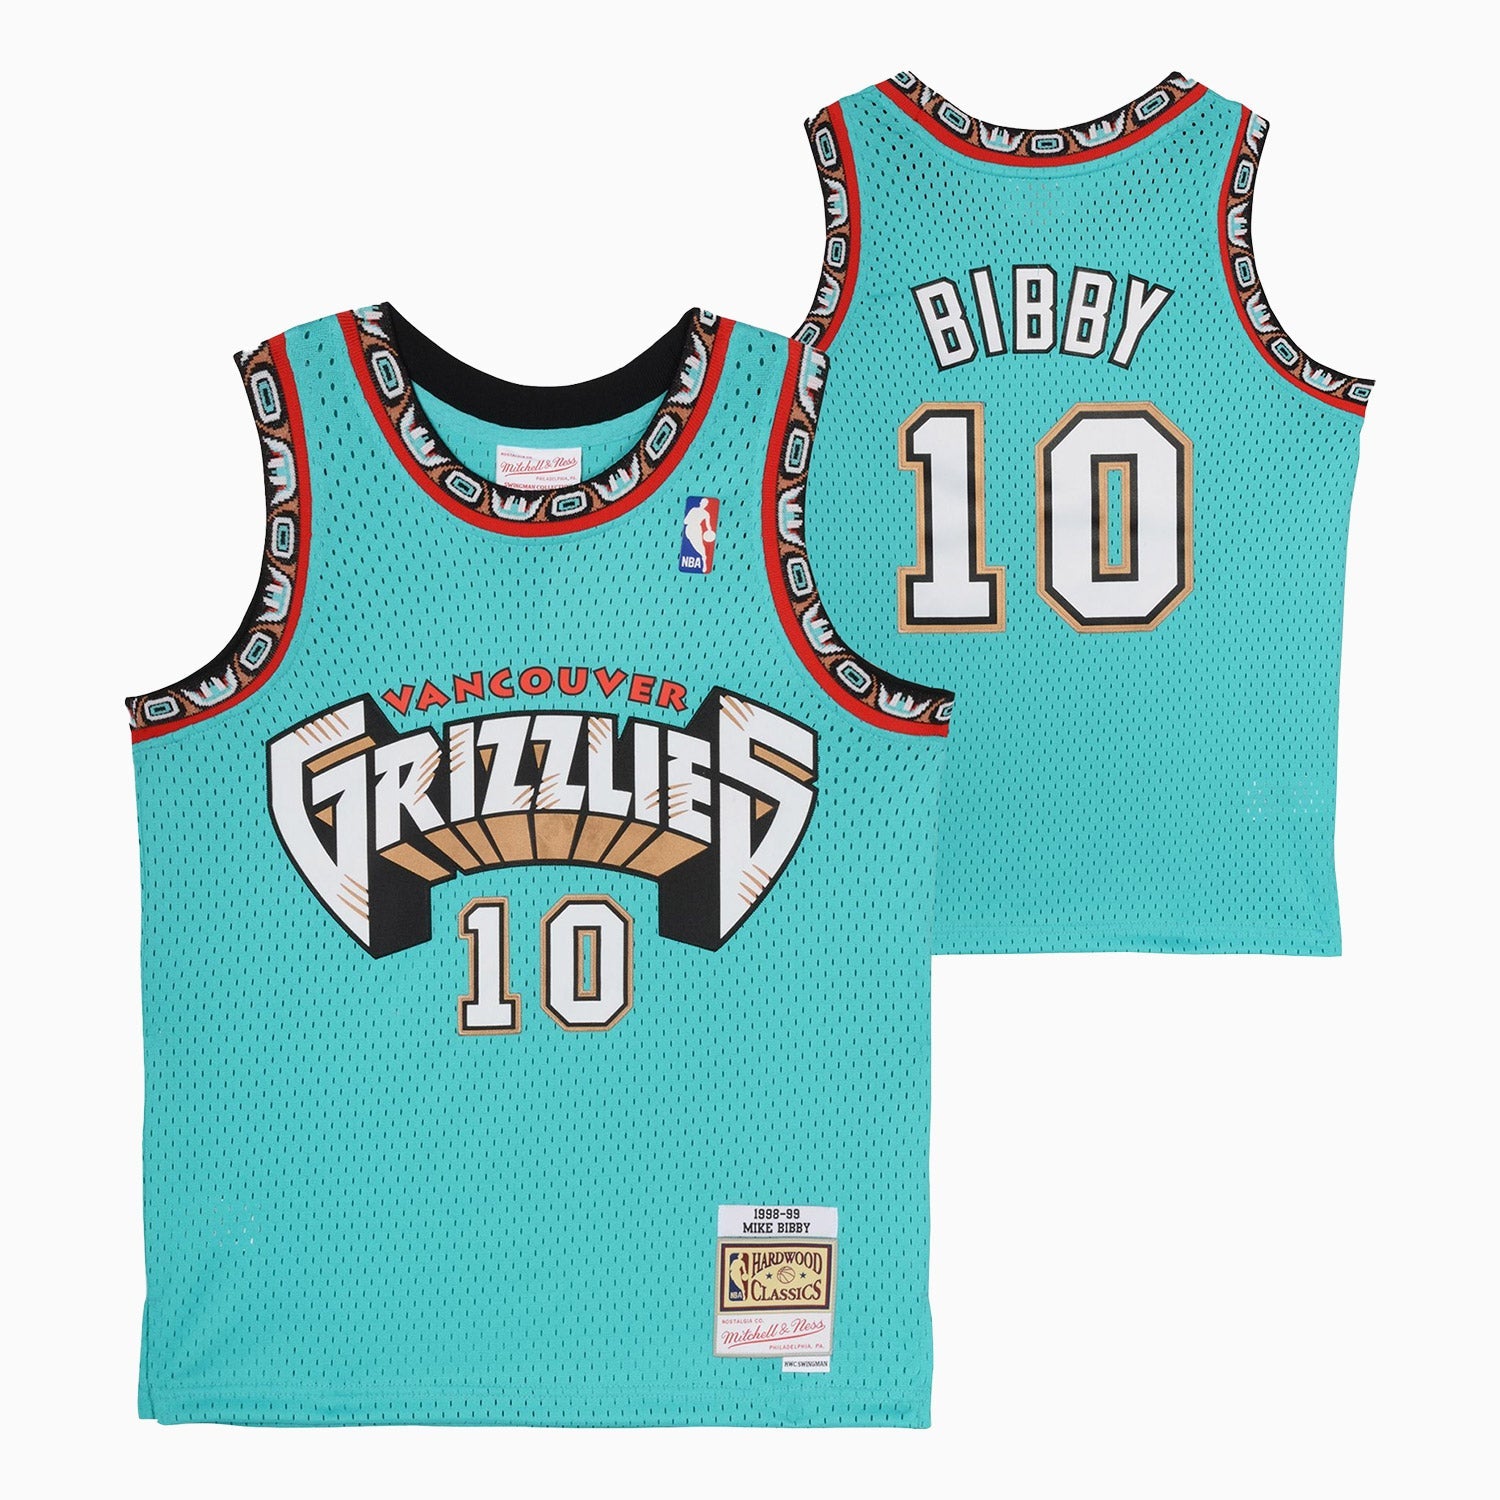 mitchell-ness-swingman-mike-bibby-vancouver-grizzlies-nba-jersey-toddlers-9n2t1brd0-vgzmb-y98